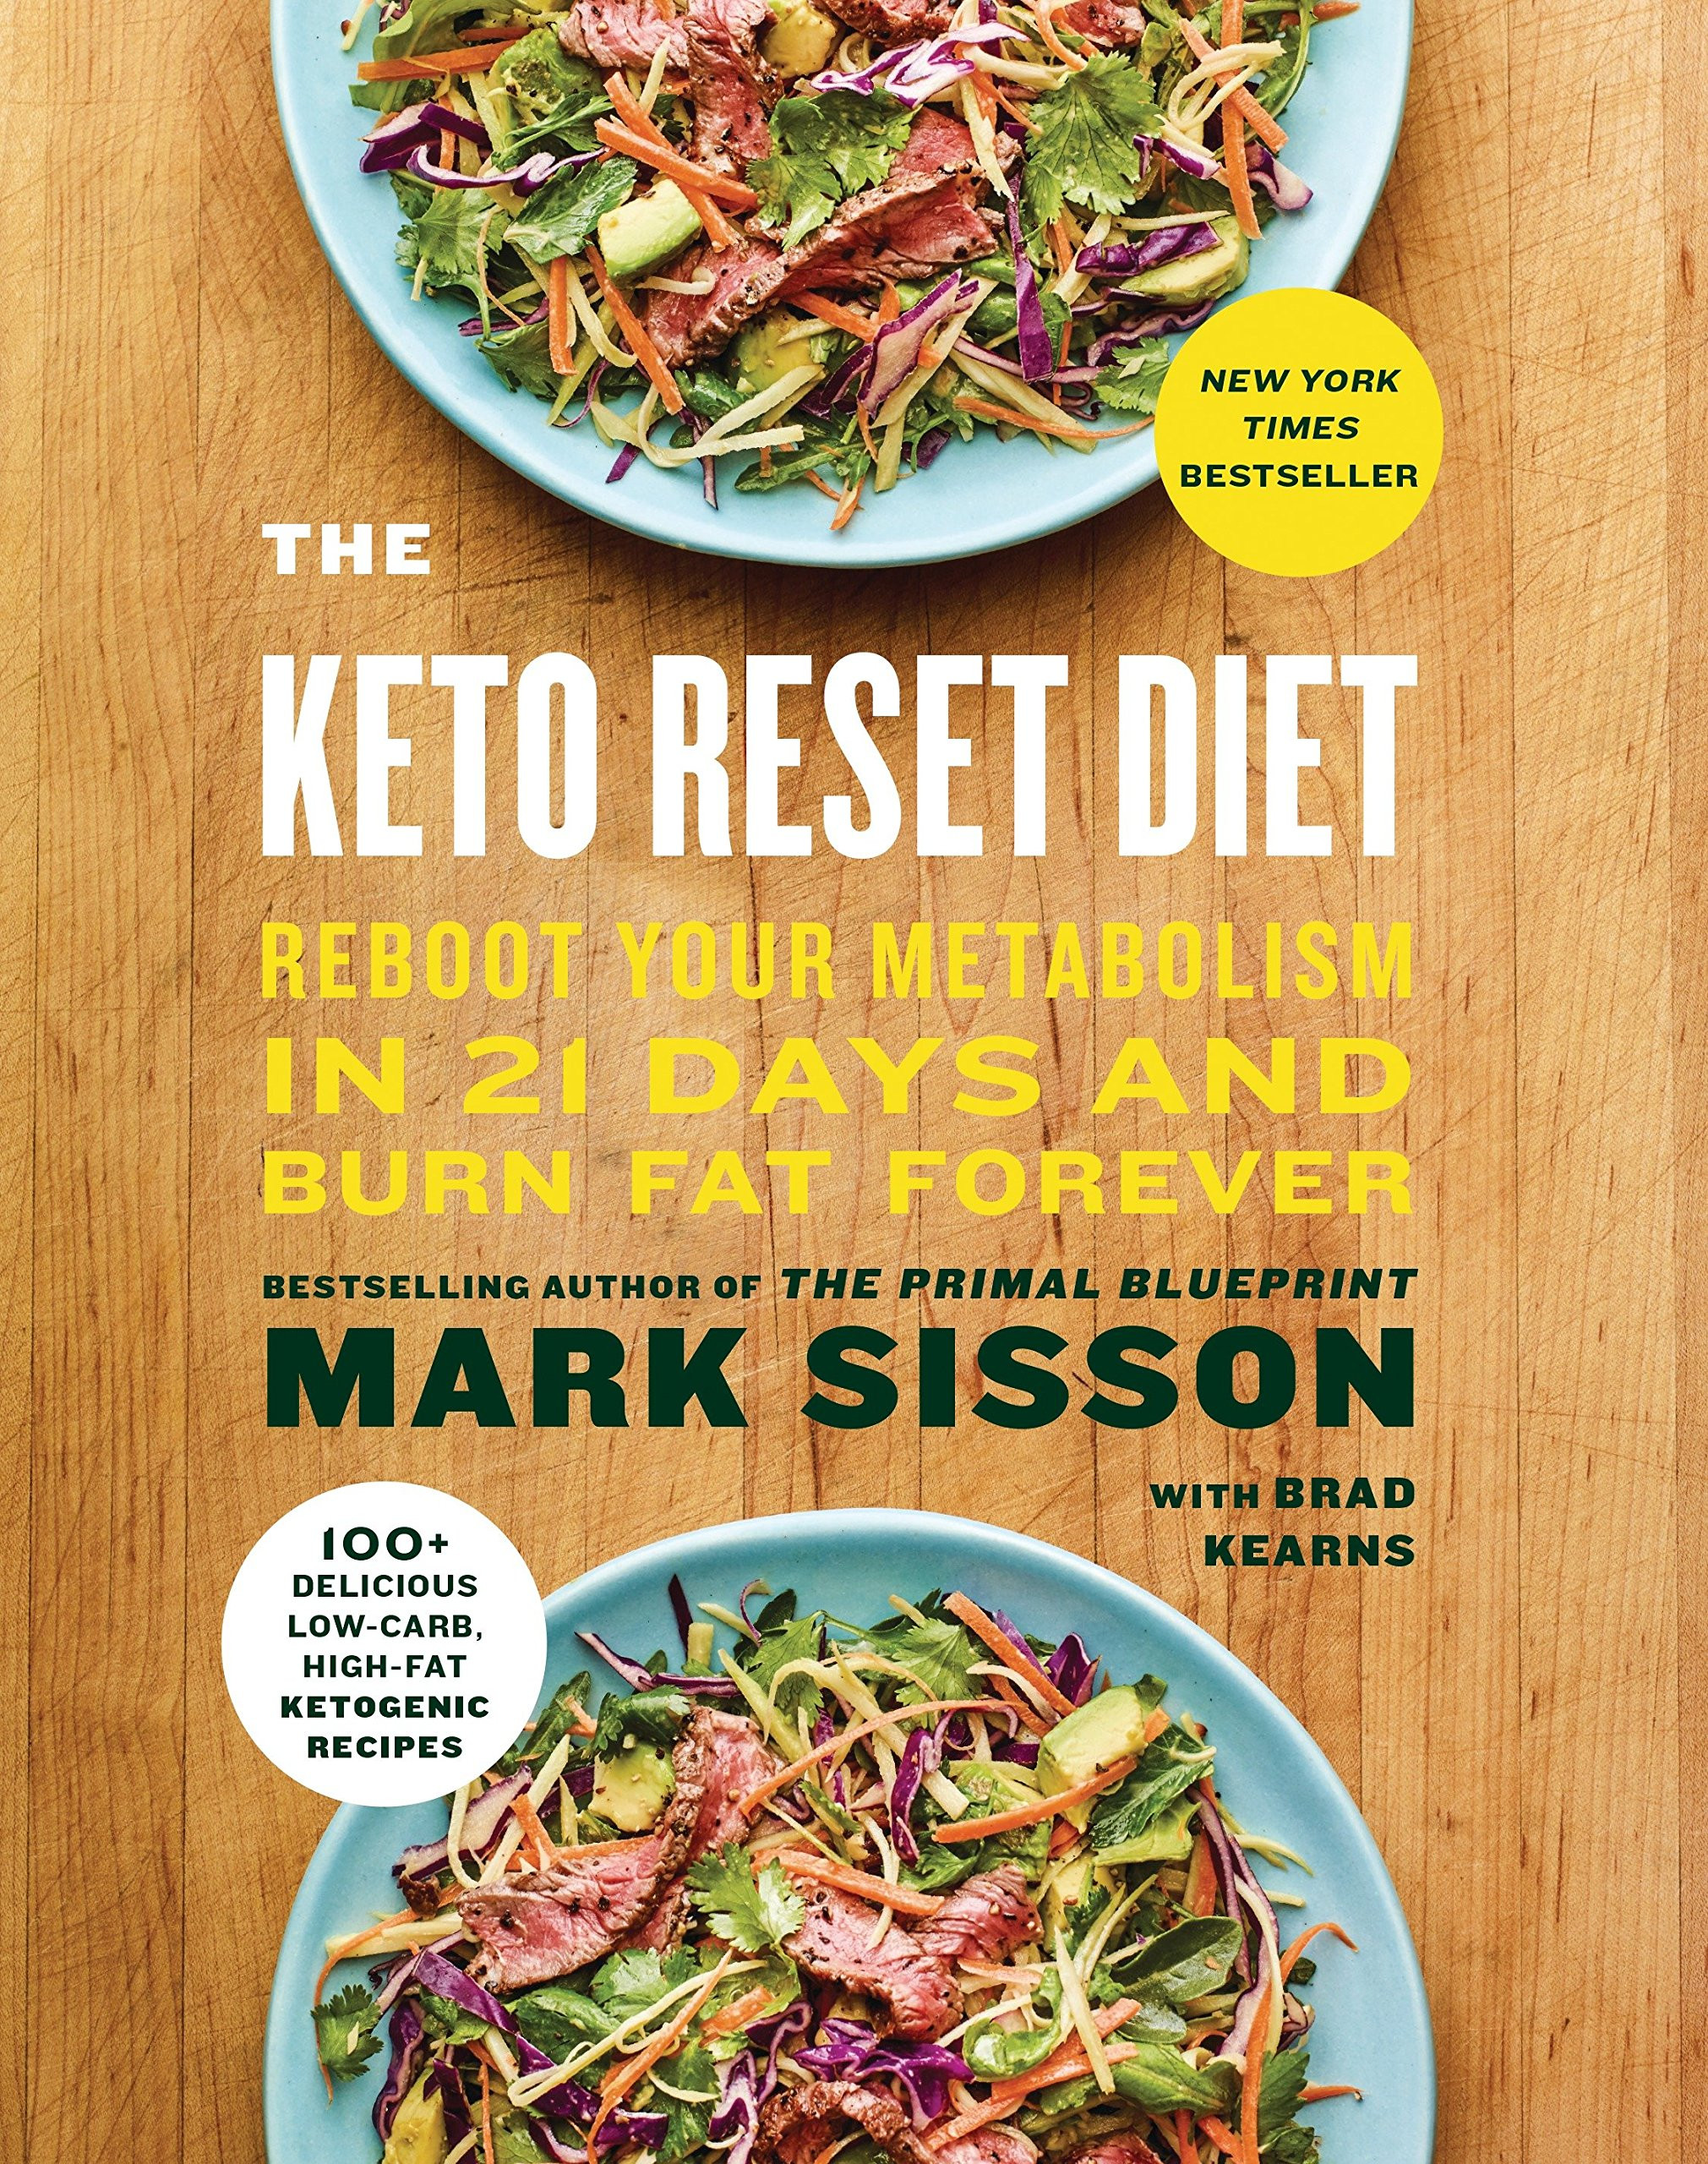 15 Ideas for Keto Reset Diet Book